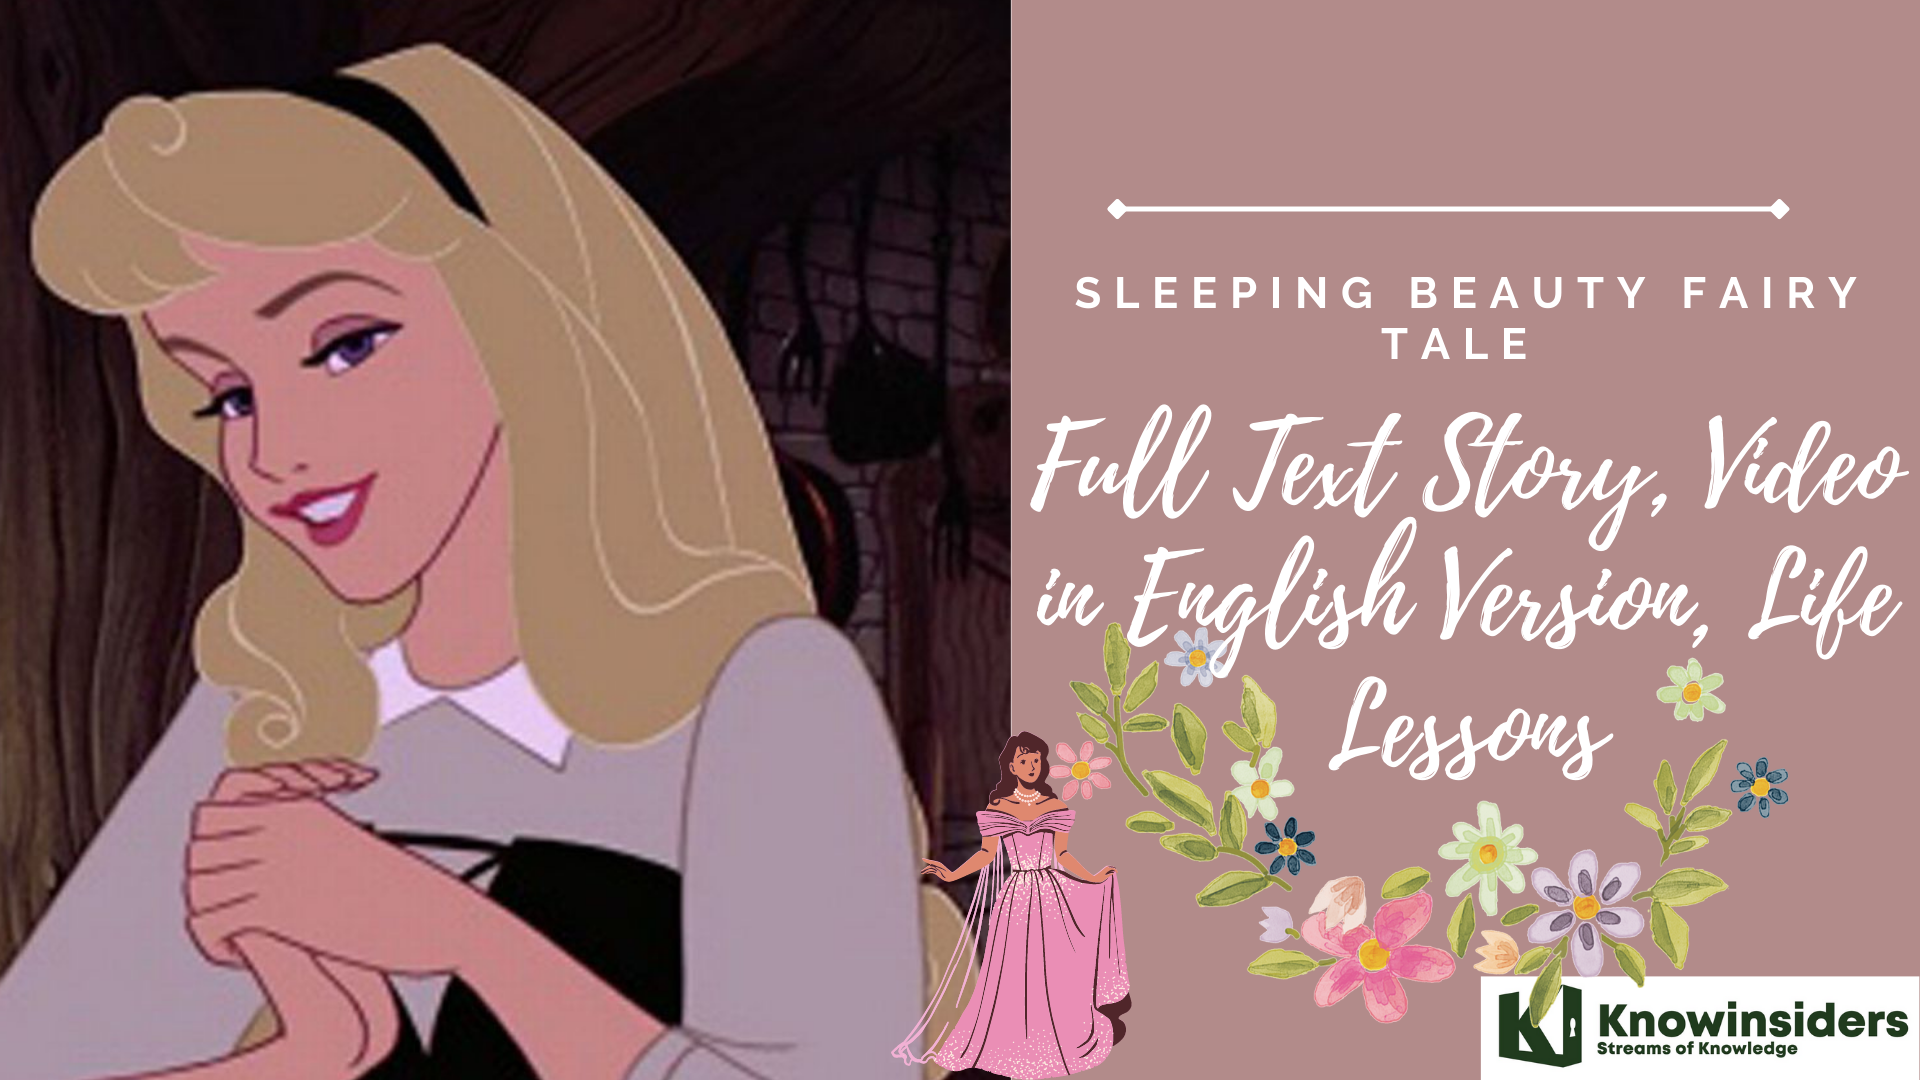 Sleeping Beauty: Full Text Story, Video in English Version, Life Lessons